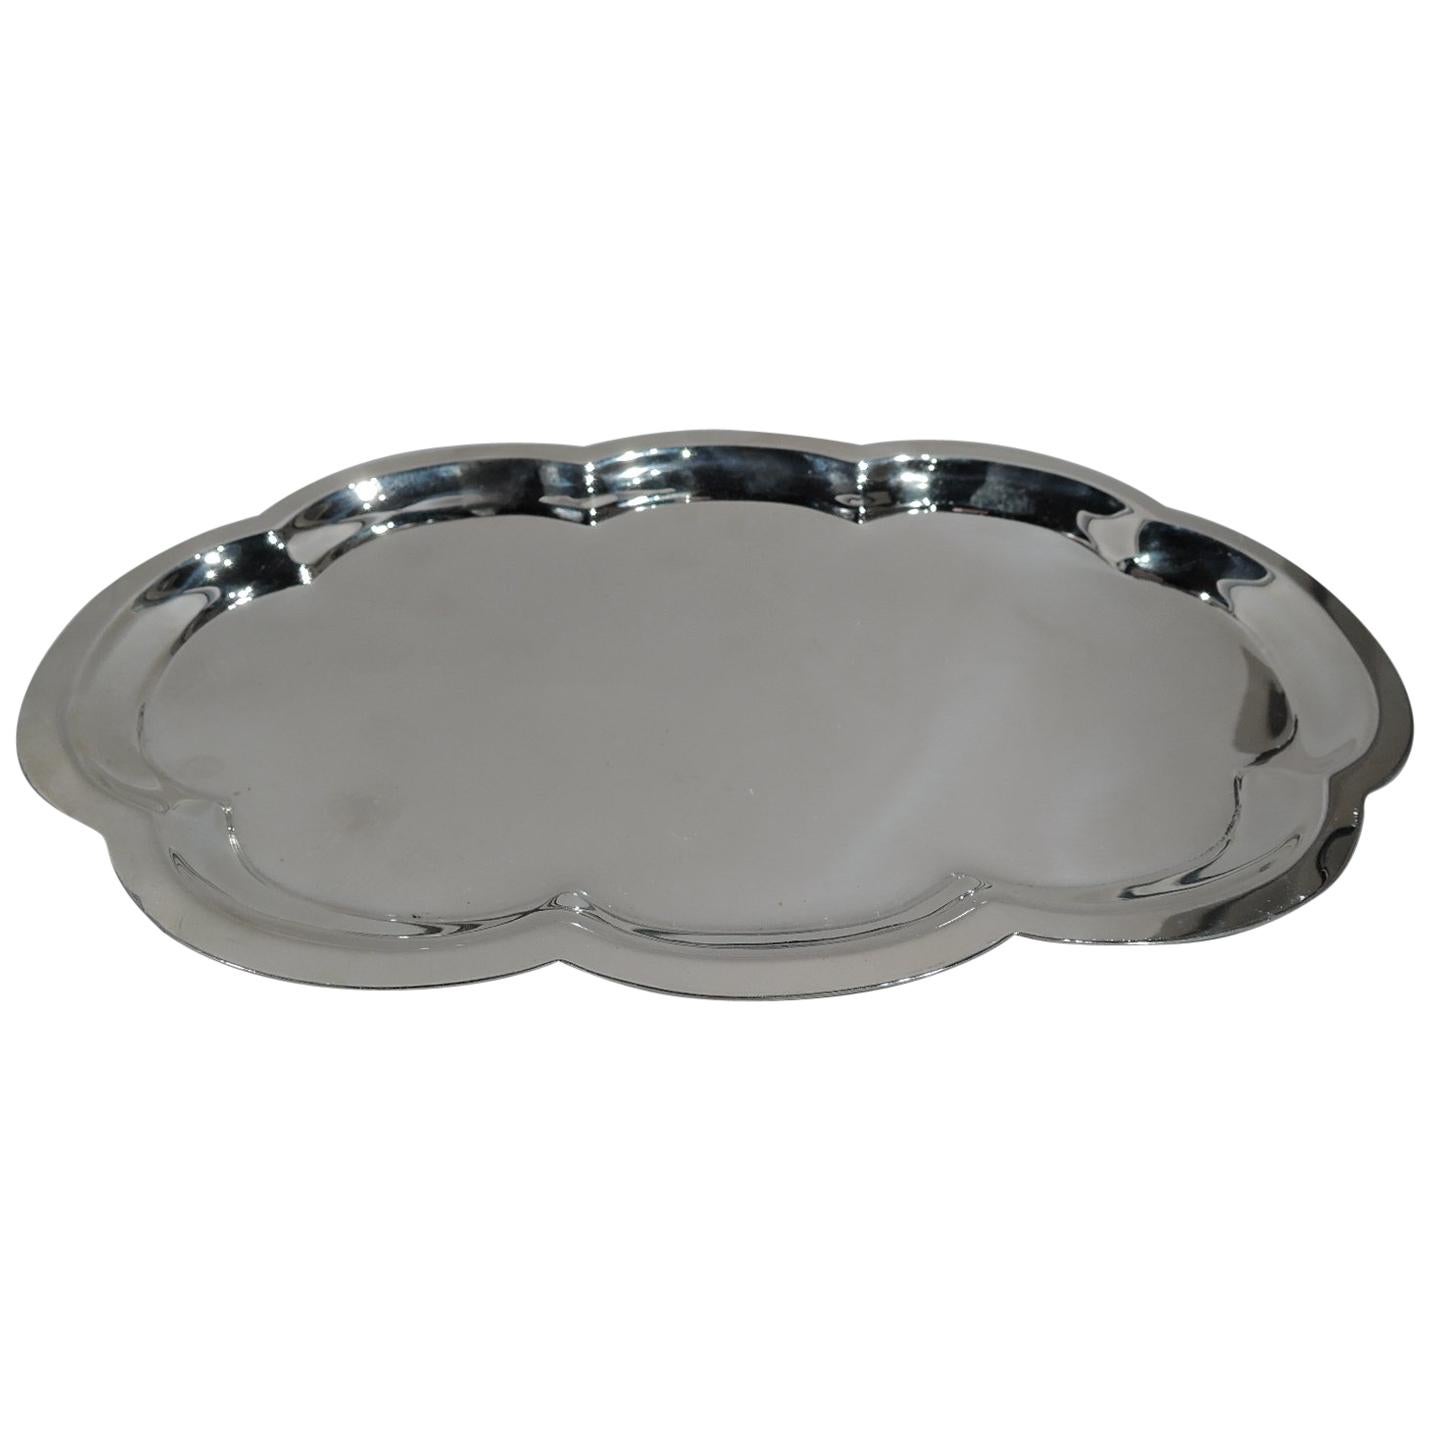 American Mid-Century Modern Sterling Silver Multi-Foil Shaped Tray